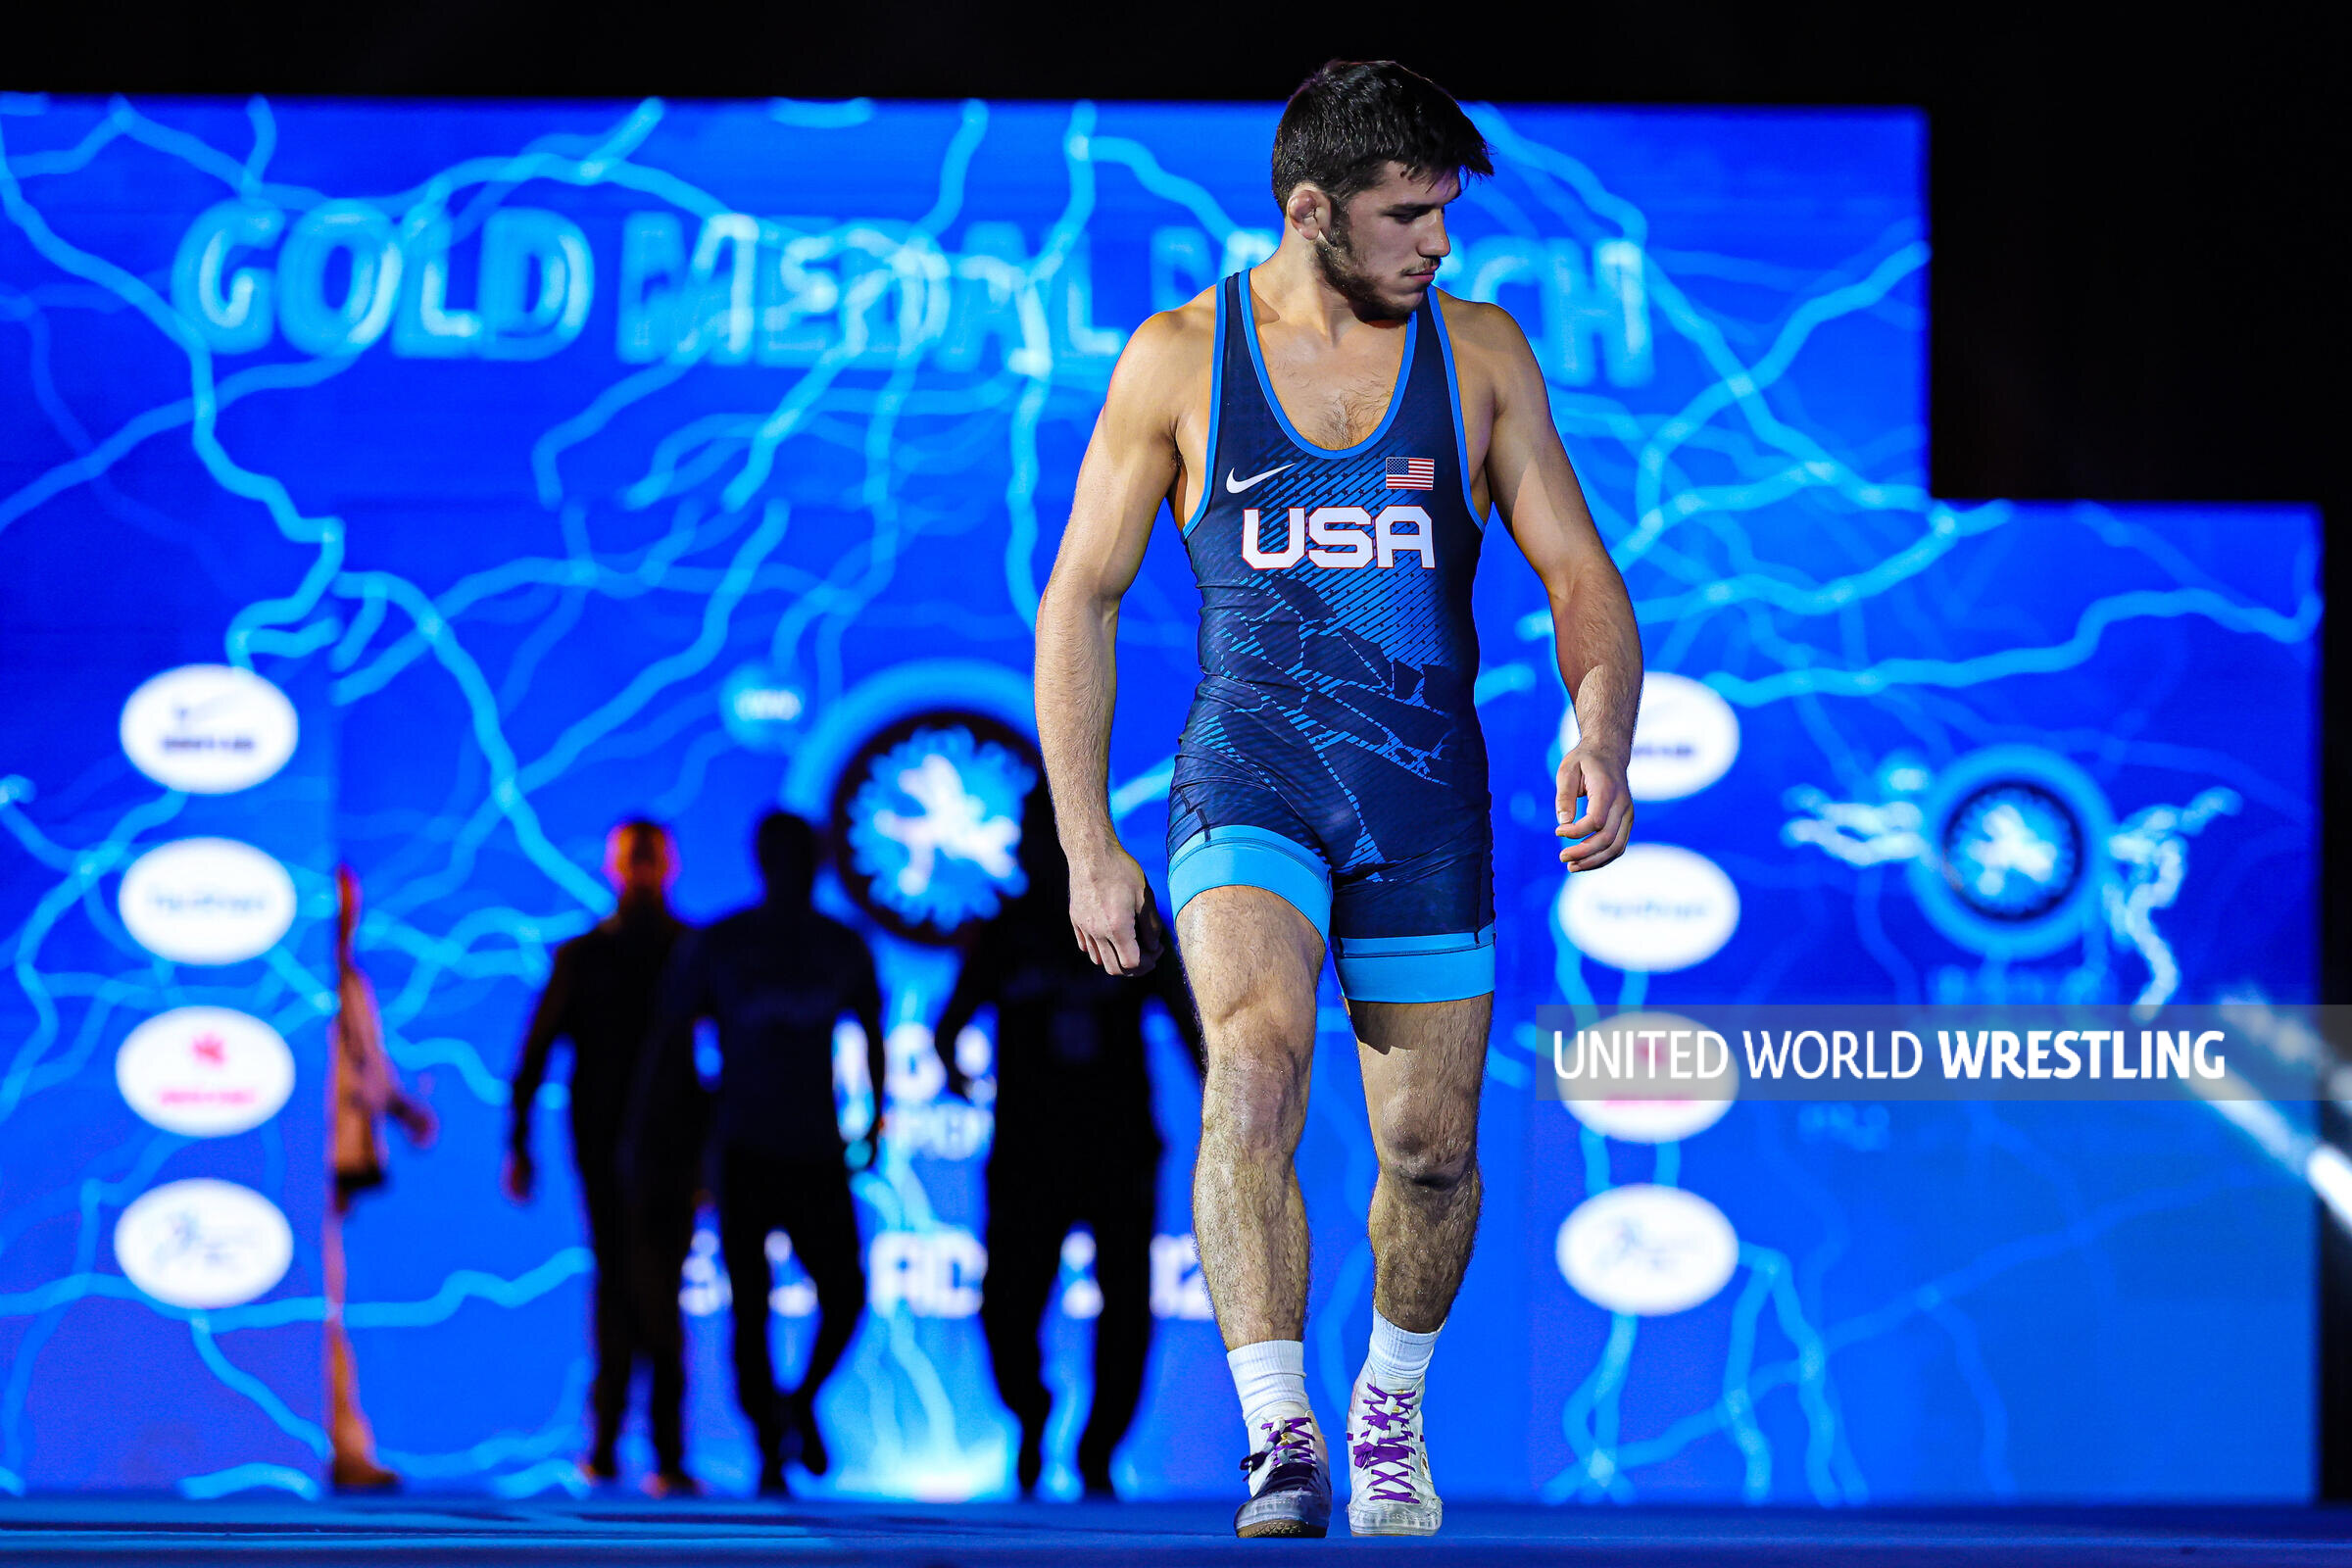 Snyder wins third World gold, Diakomihalis claims silver, Gross gets fifth as USA takes fourth men's freestyle World Team title